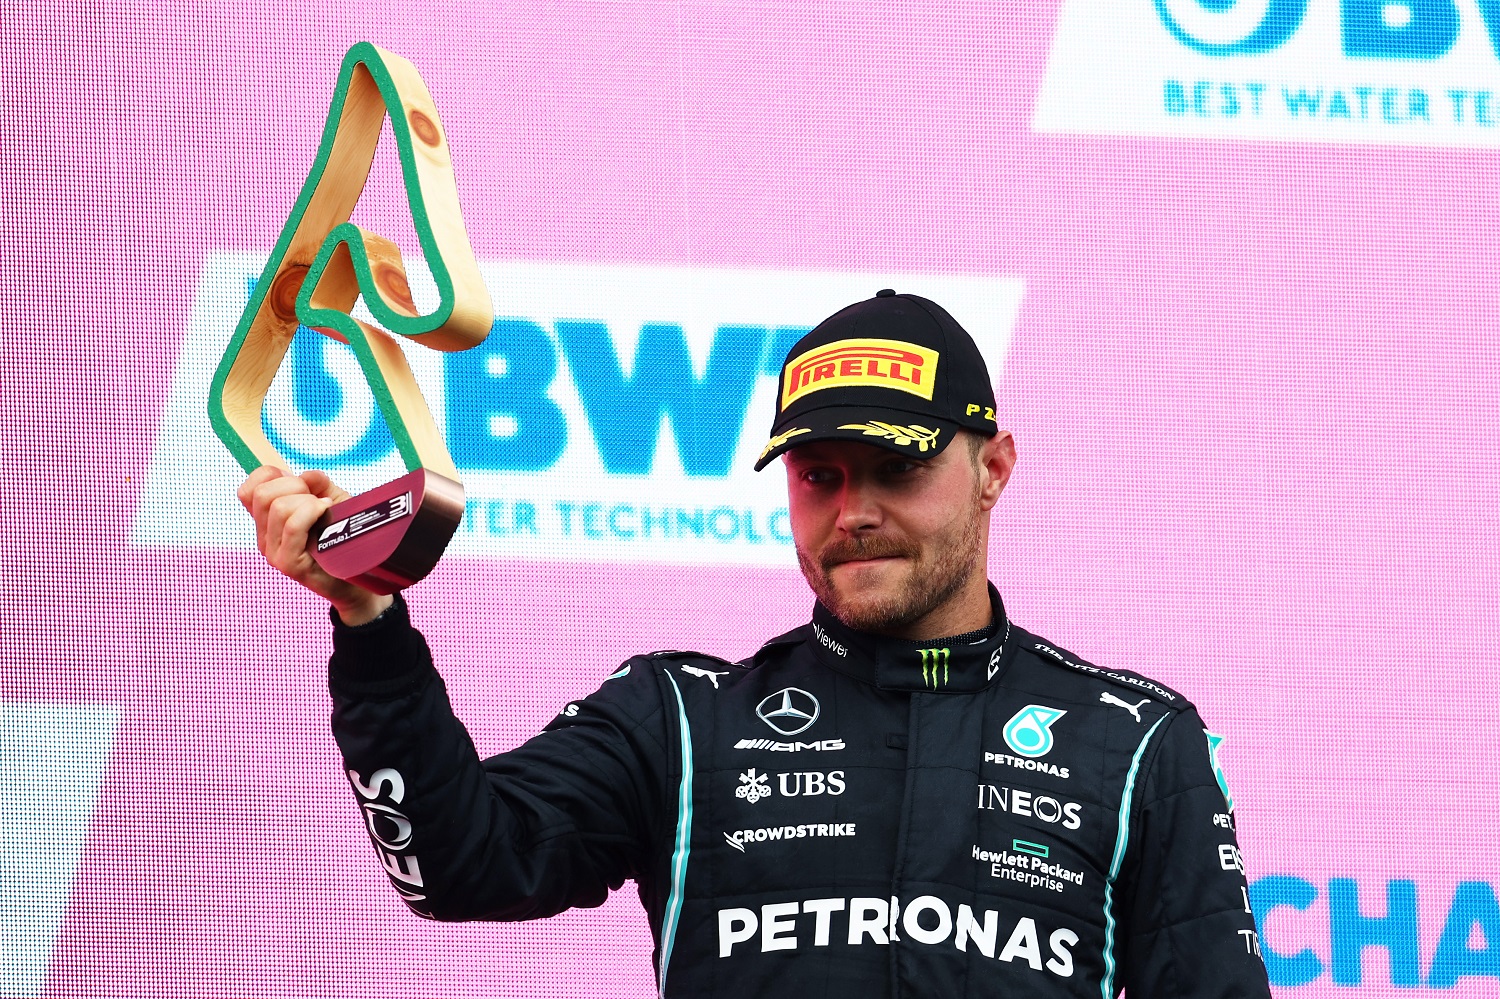 Valtteri Bottas of Mercedes celebrates on the podium after the Formula 1  Grand Prix of Styria at Red Bull Ring on June 27, 2021,  in Spielberg, Austria. (| Clive Rose/Getty Images